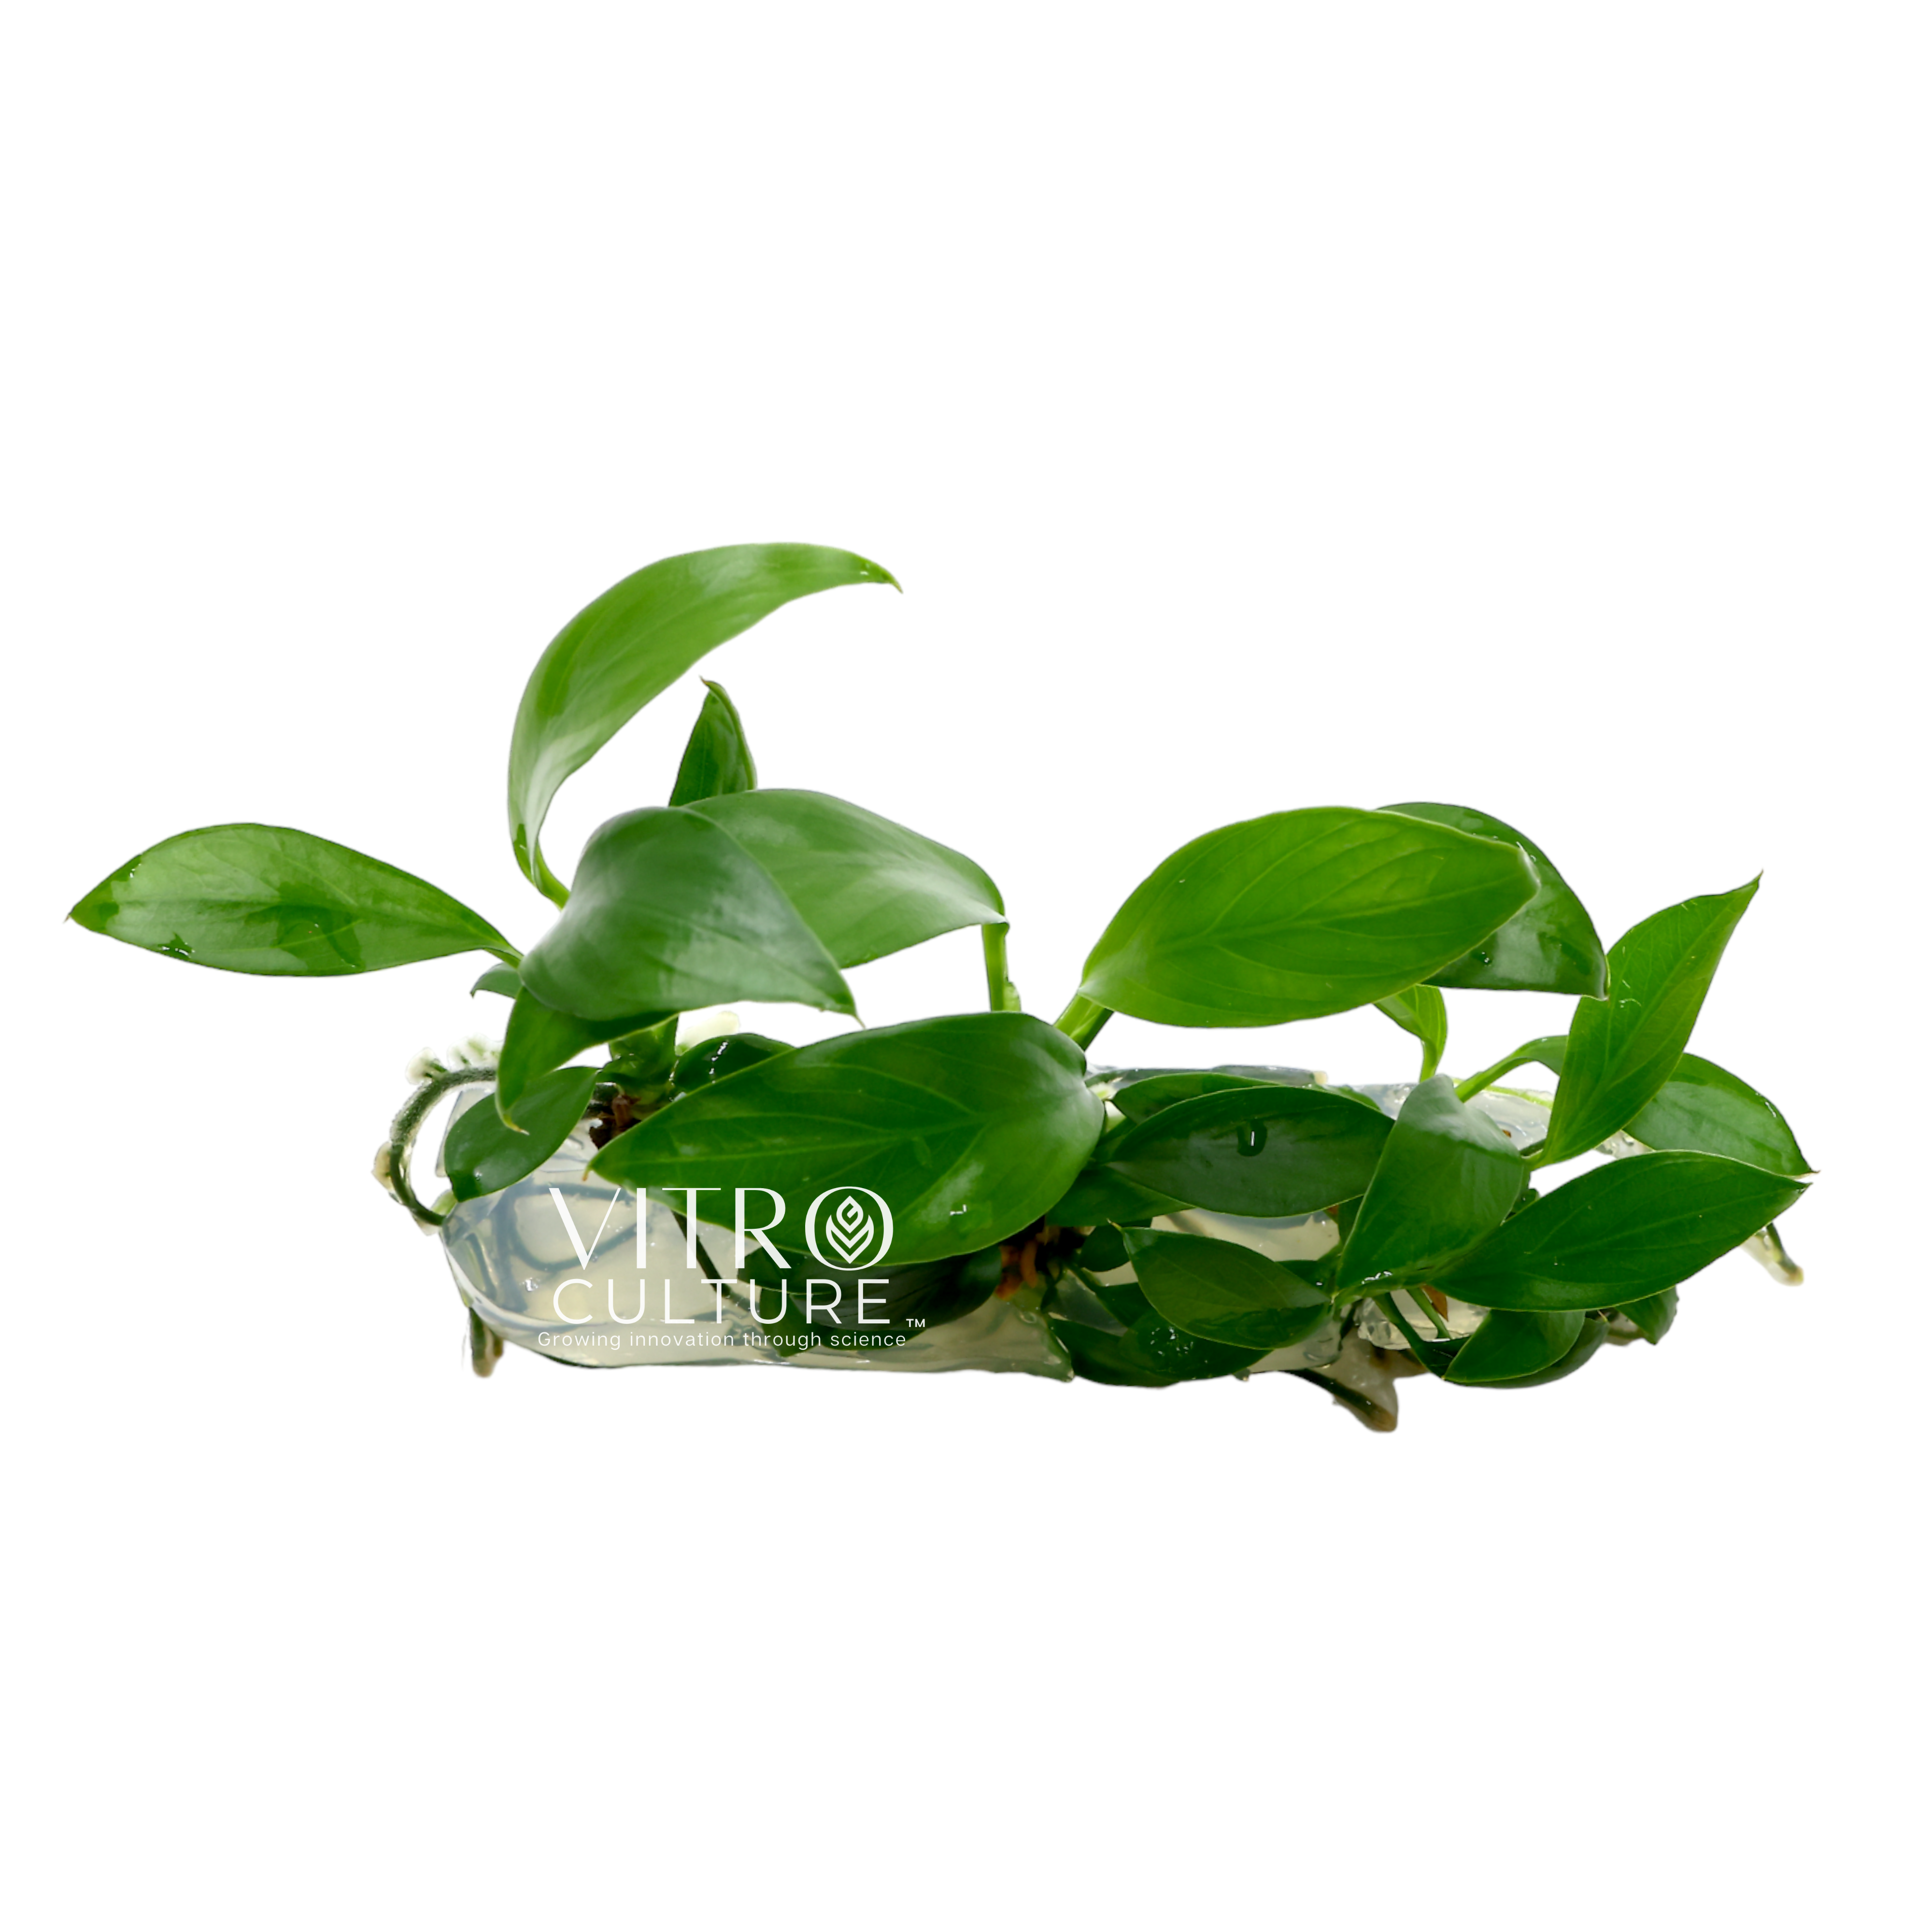 Anubias afzelii is a slow-growing plant, but it is worth the wait. Its thick and waxy leaves can grow up to six inches long and have a unique, elongated shape that sets it apart from other Anubias species.